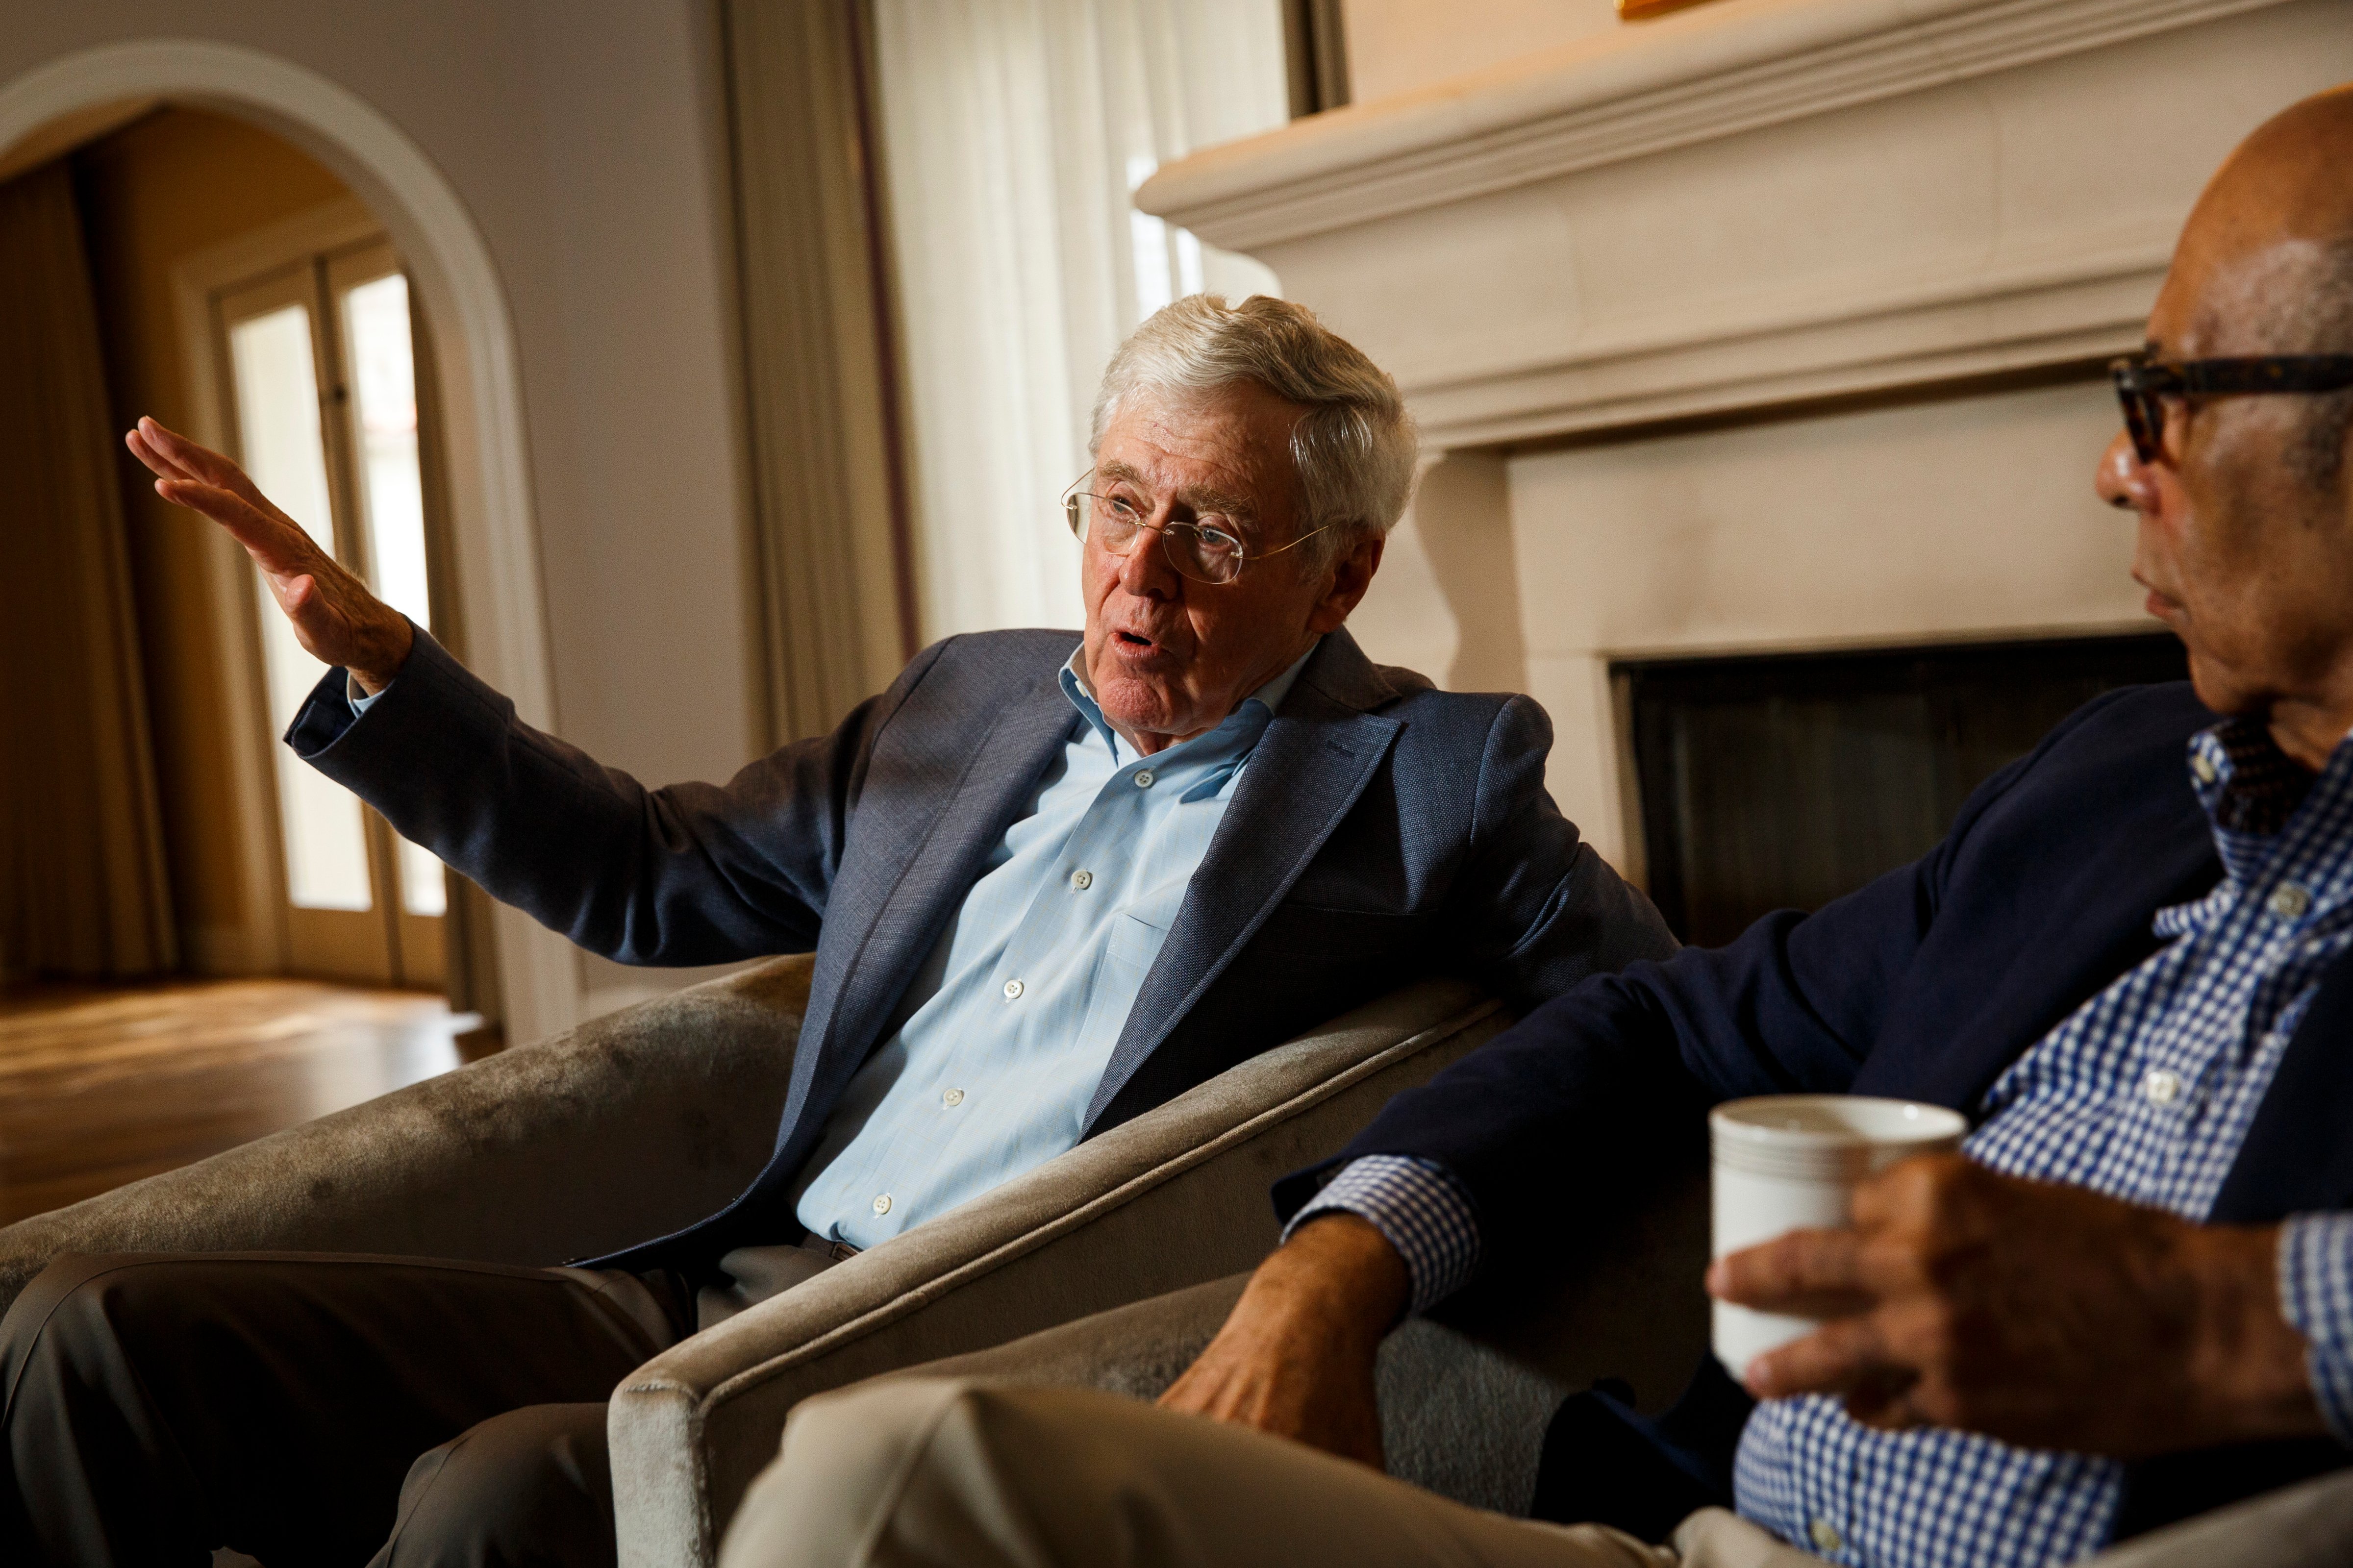 Dana Point, CA - August 3: Charles Koch and Dr. Michael Lomax, president and chief executive officer of the United Negro College Fund, speak during an interview with the Washington Post at the Freedom Partners Summit on Monday, August 3, 2015 in Dana Point, CA. (Photo by Patrick T. Fallon for The Washington Post via Getty Images) (The Washington Post&mdash;The Washington Post/Getty Images)